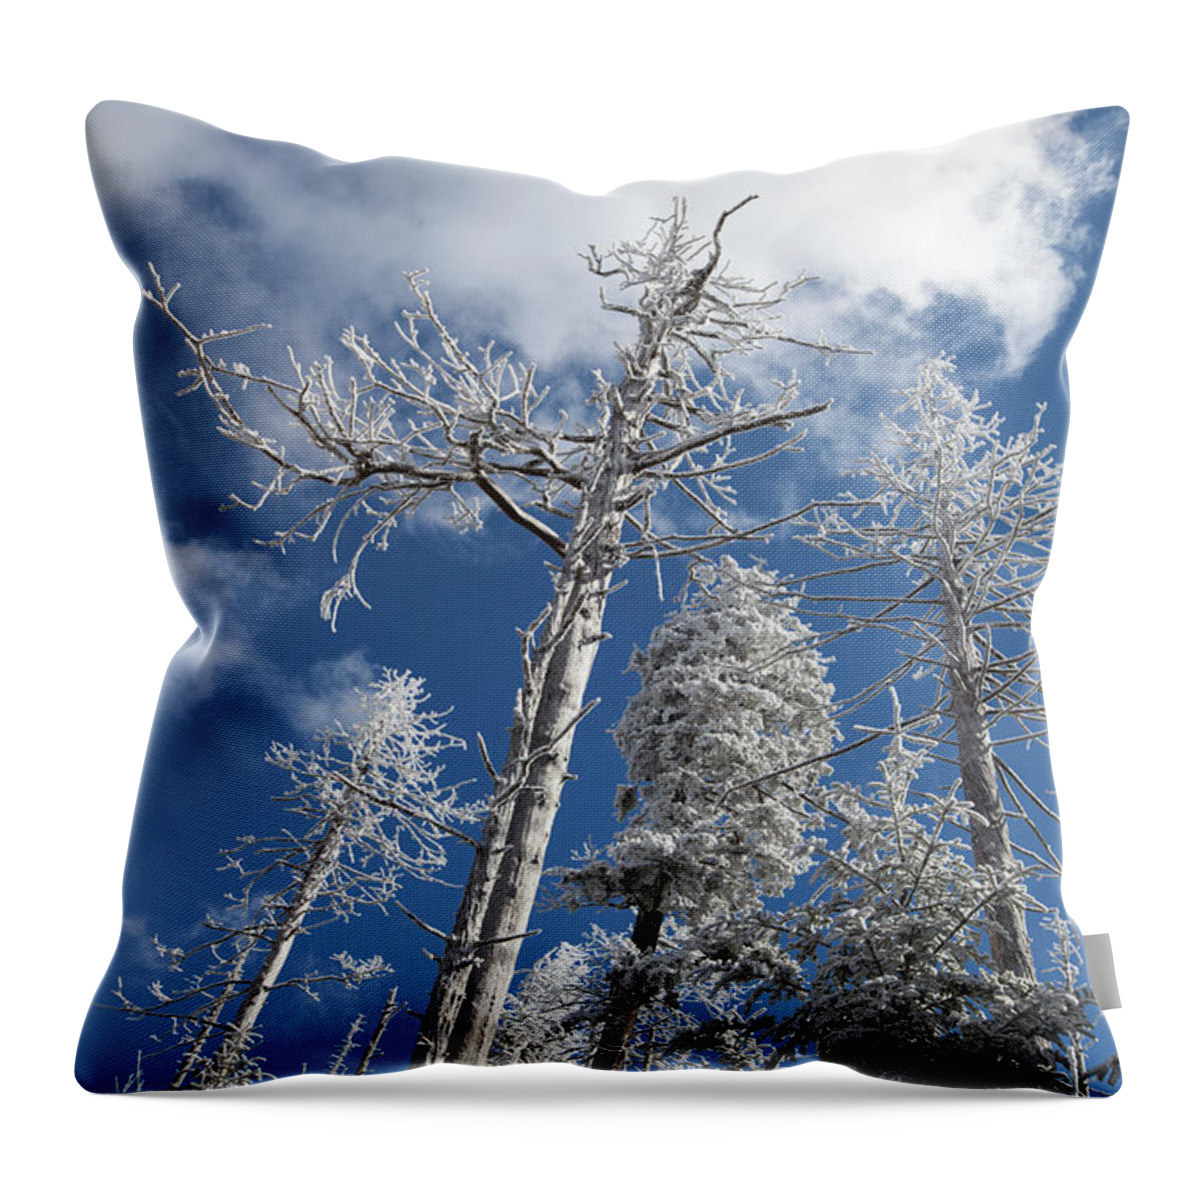 North Carolina Throw Pillow featuring the photograph Hoar Frost On Dead Trees #1 by Jerry Whaley